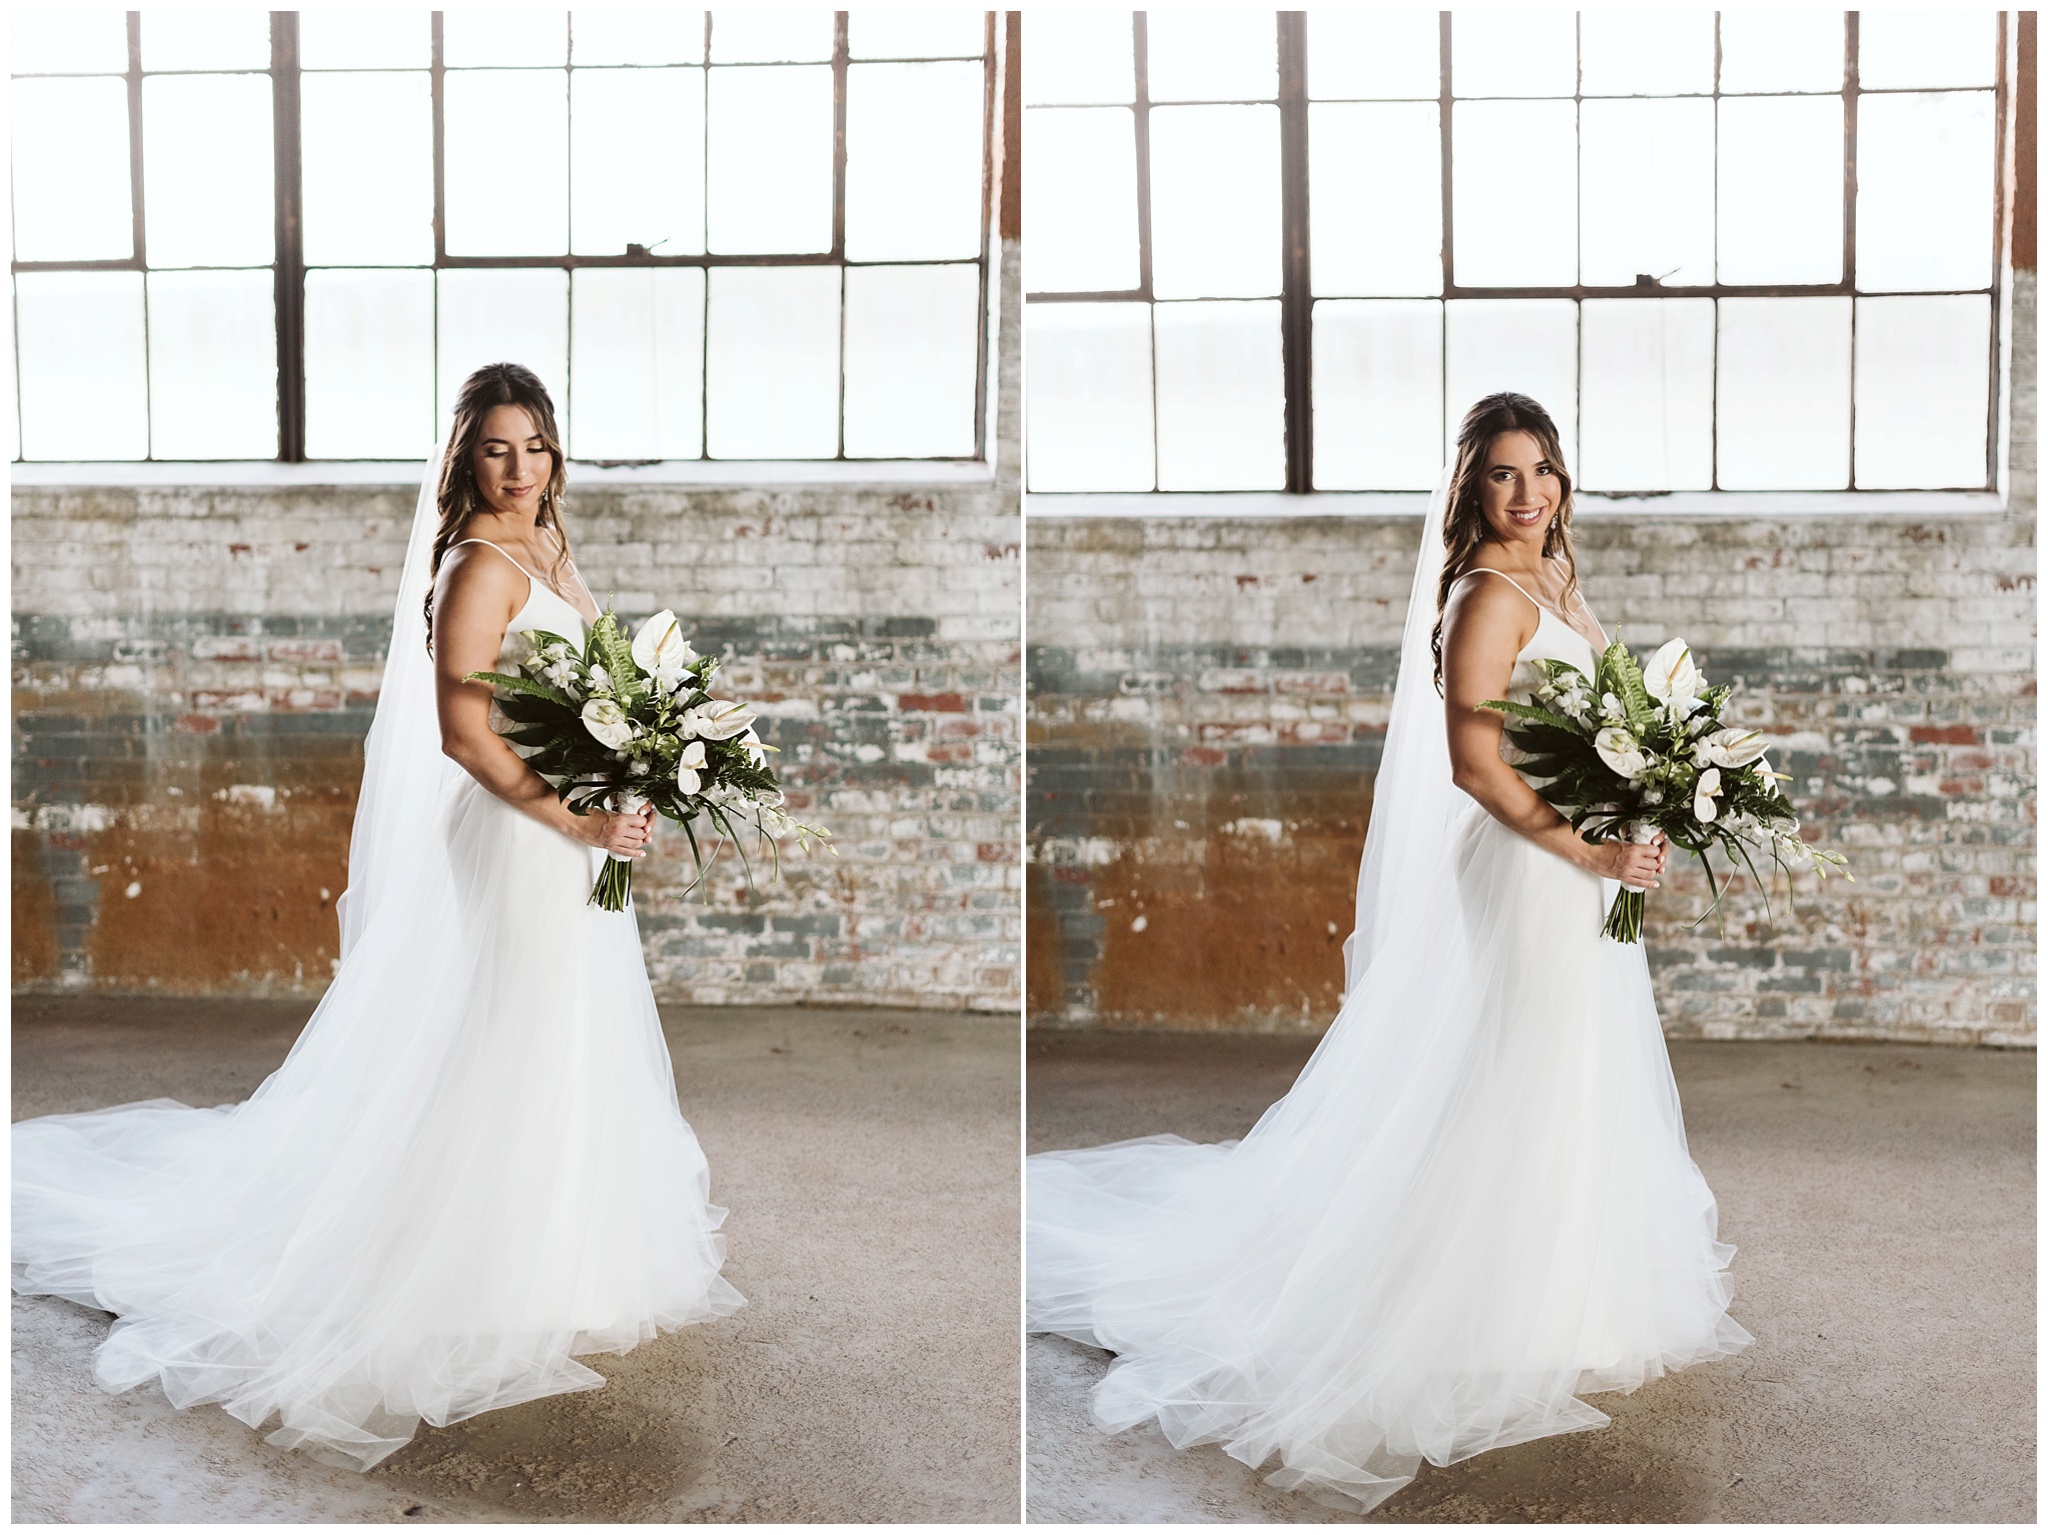 Henna wearing her wedding dress in the warehouse at the glass factory